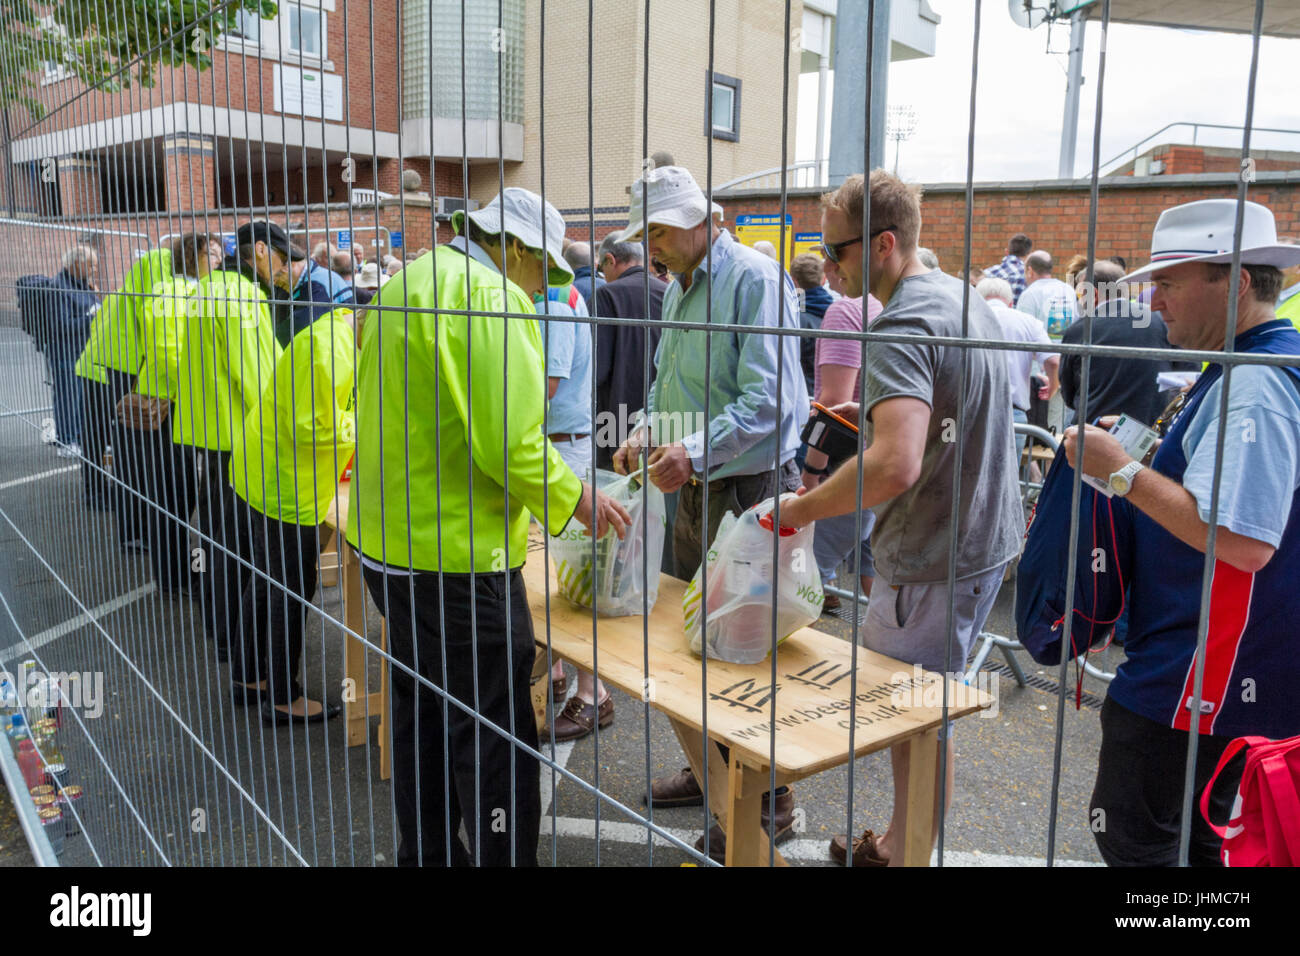 Trent Bridge, West Bridgford, Nottinghamshire, UK. 14th July 2017. Spectators arrive for the second Cricket test match between England and South Africa. Security around the ground was increased following recent events. Credit: Martyn Williams /Alamy Live News Stock Photo